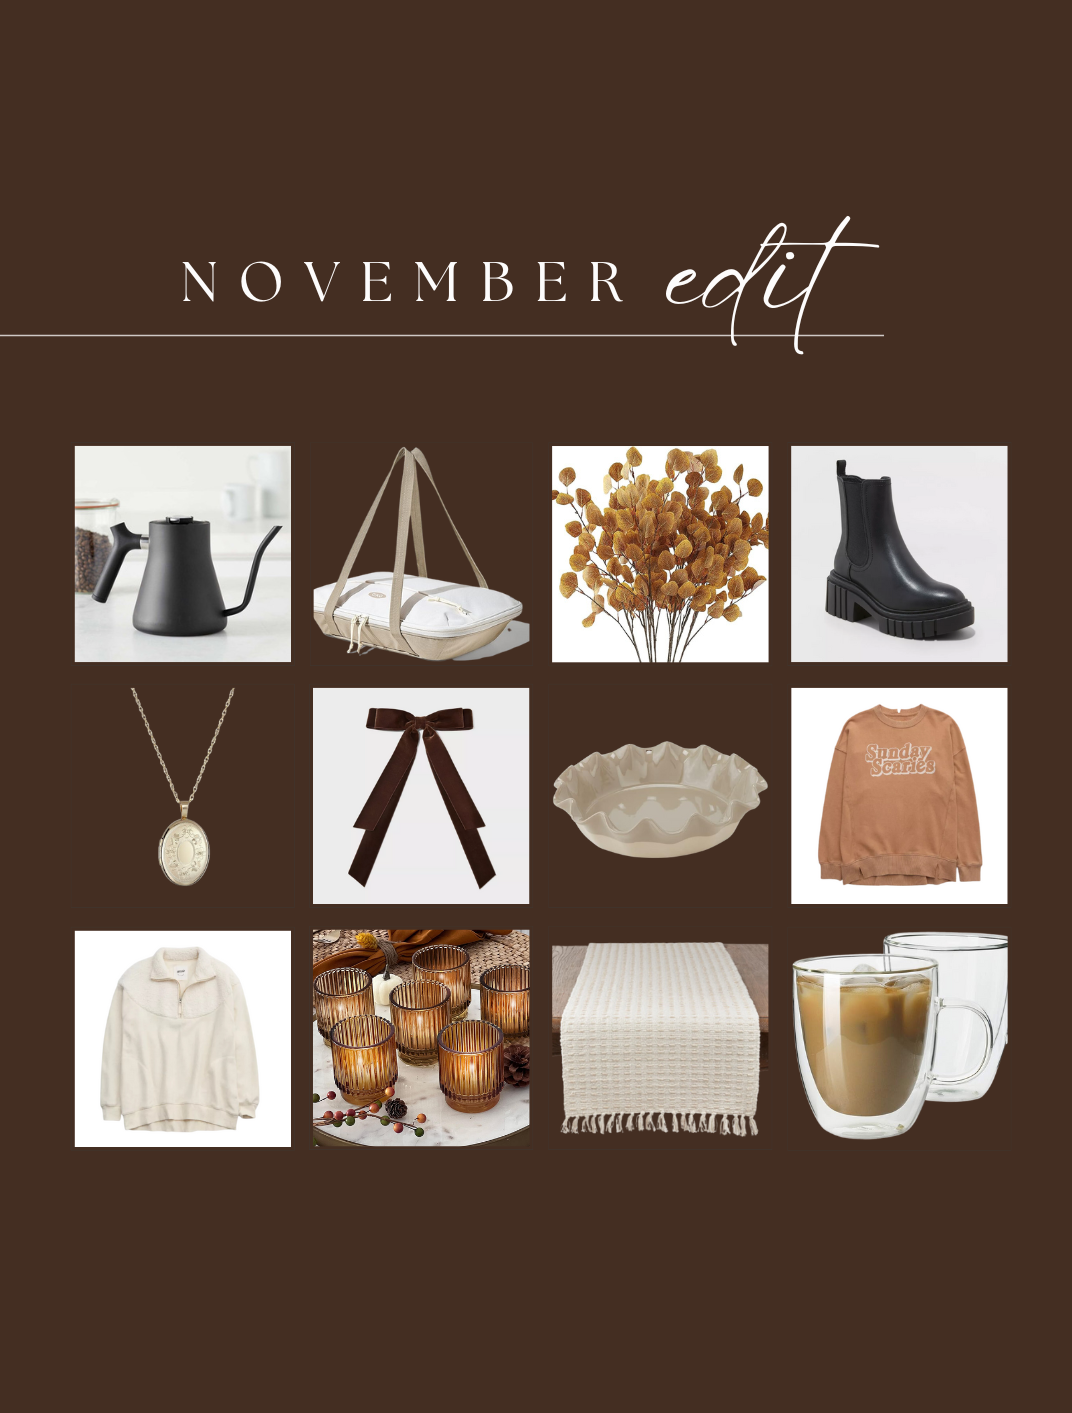 The Best of November: a curated collection of fashion, decor, and more to dress yourself and your home for the season